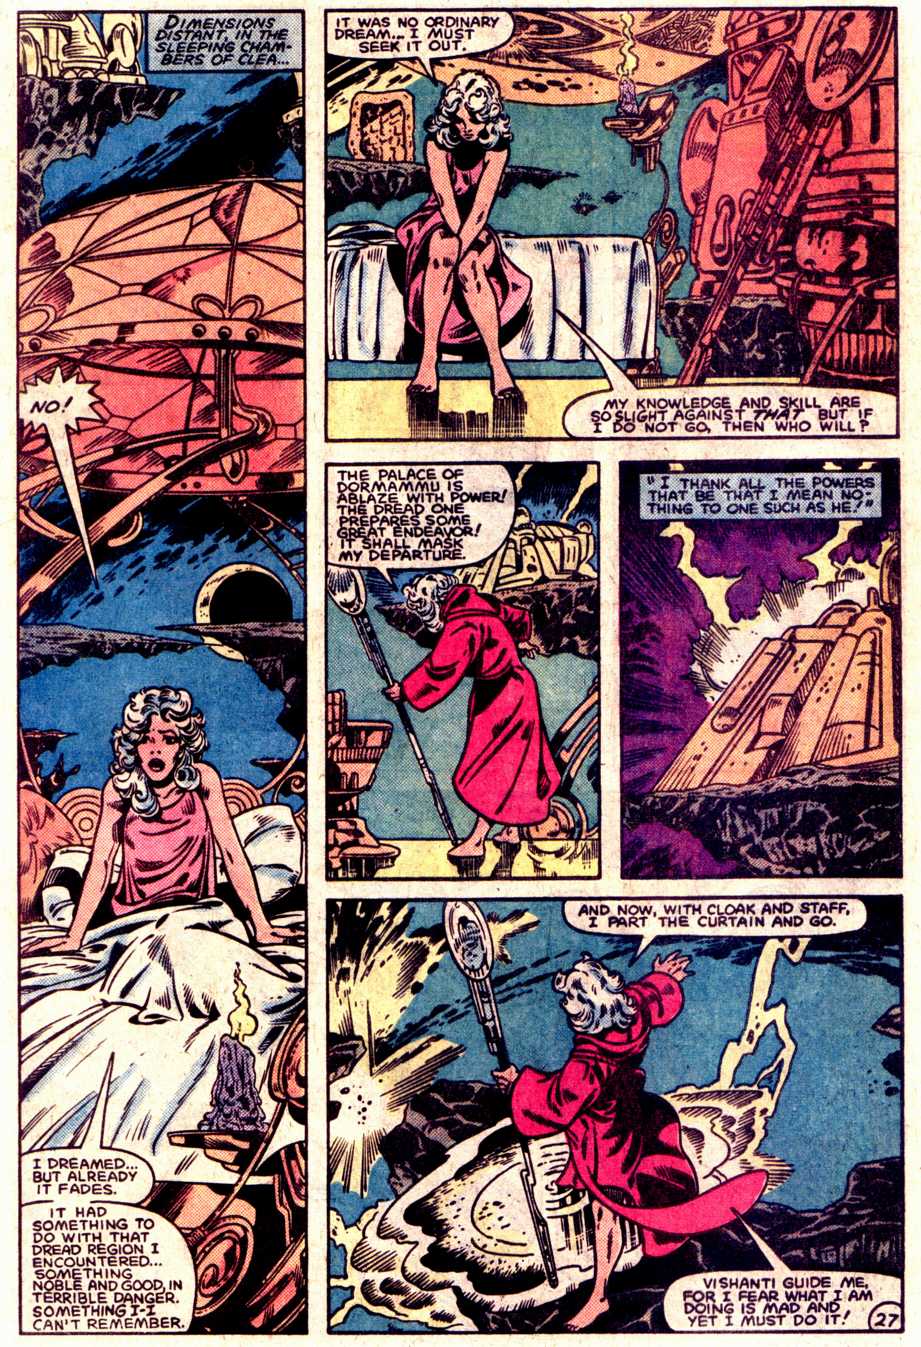 What If? (1977) issue 40 - Dr Strange had not become master of The mystic arts - Page 28